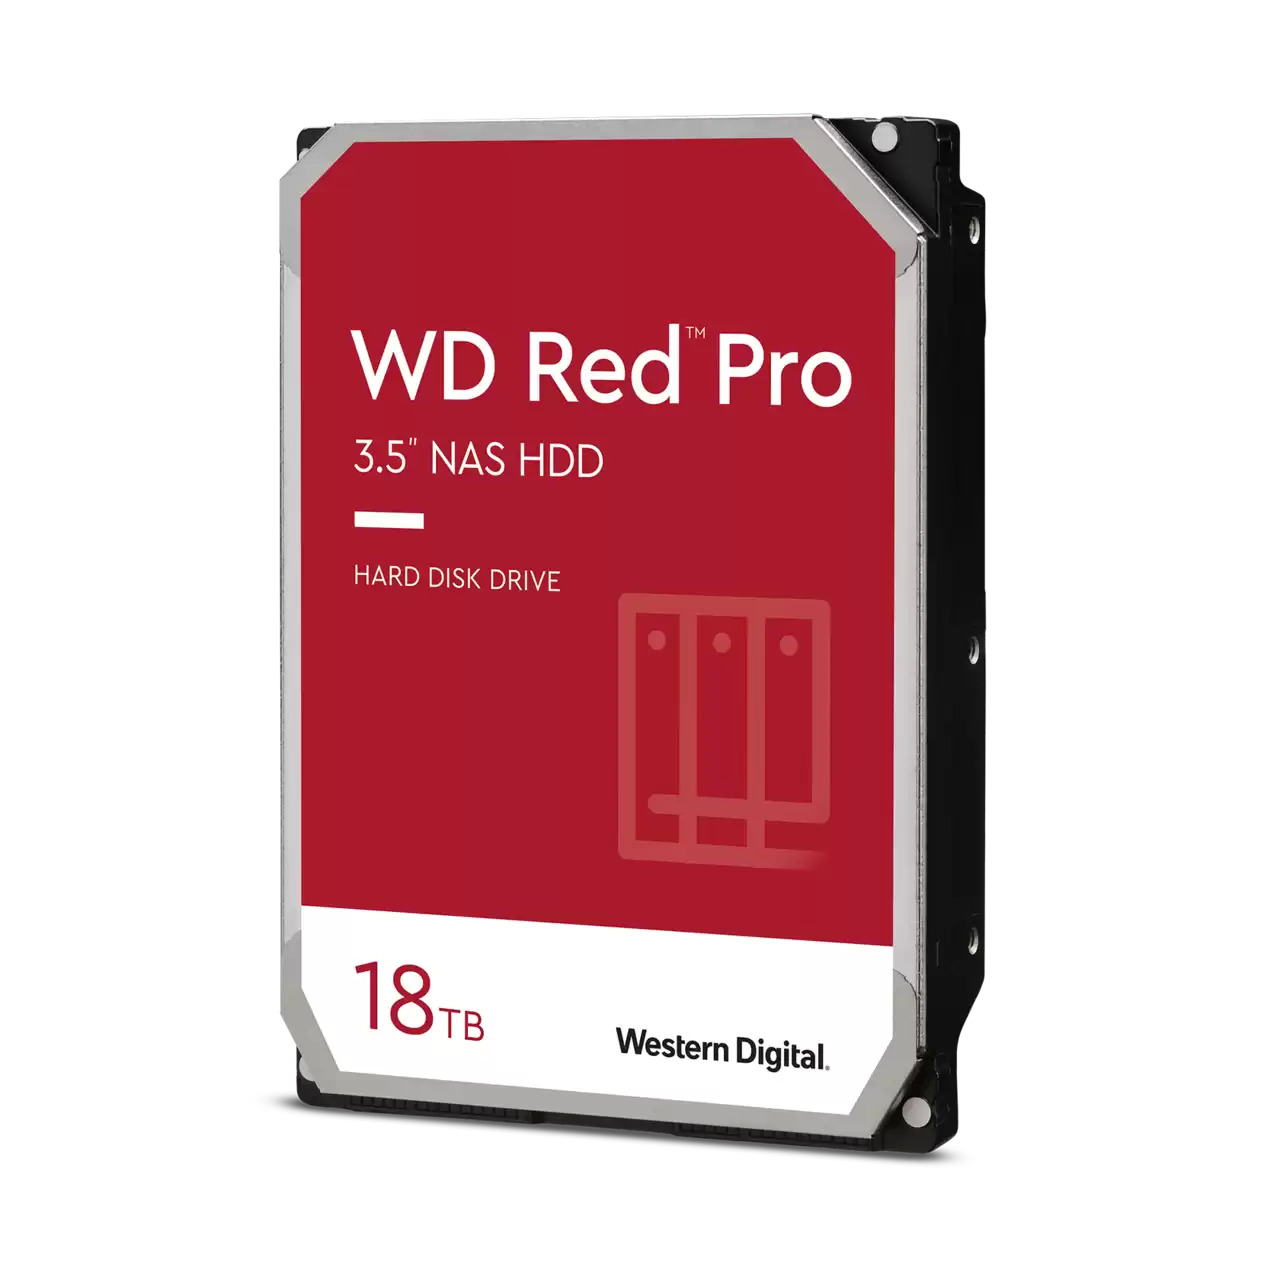 18TB Western Digital WD Red Pro 3.5" 7200 RPM NAS Internal Hard Drive 2 for $500 + Free Shipping